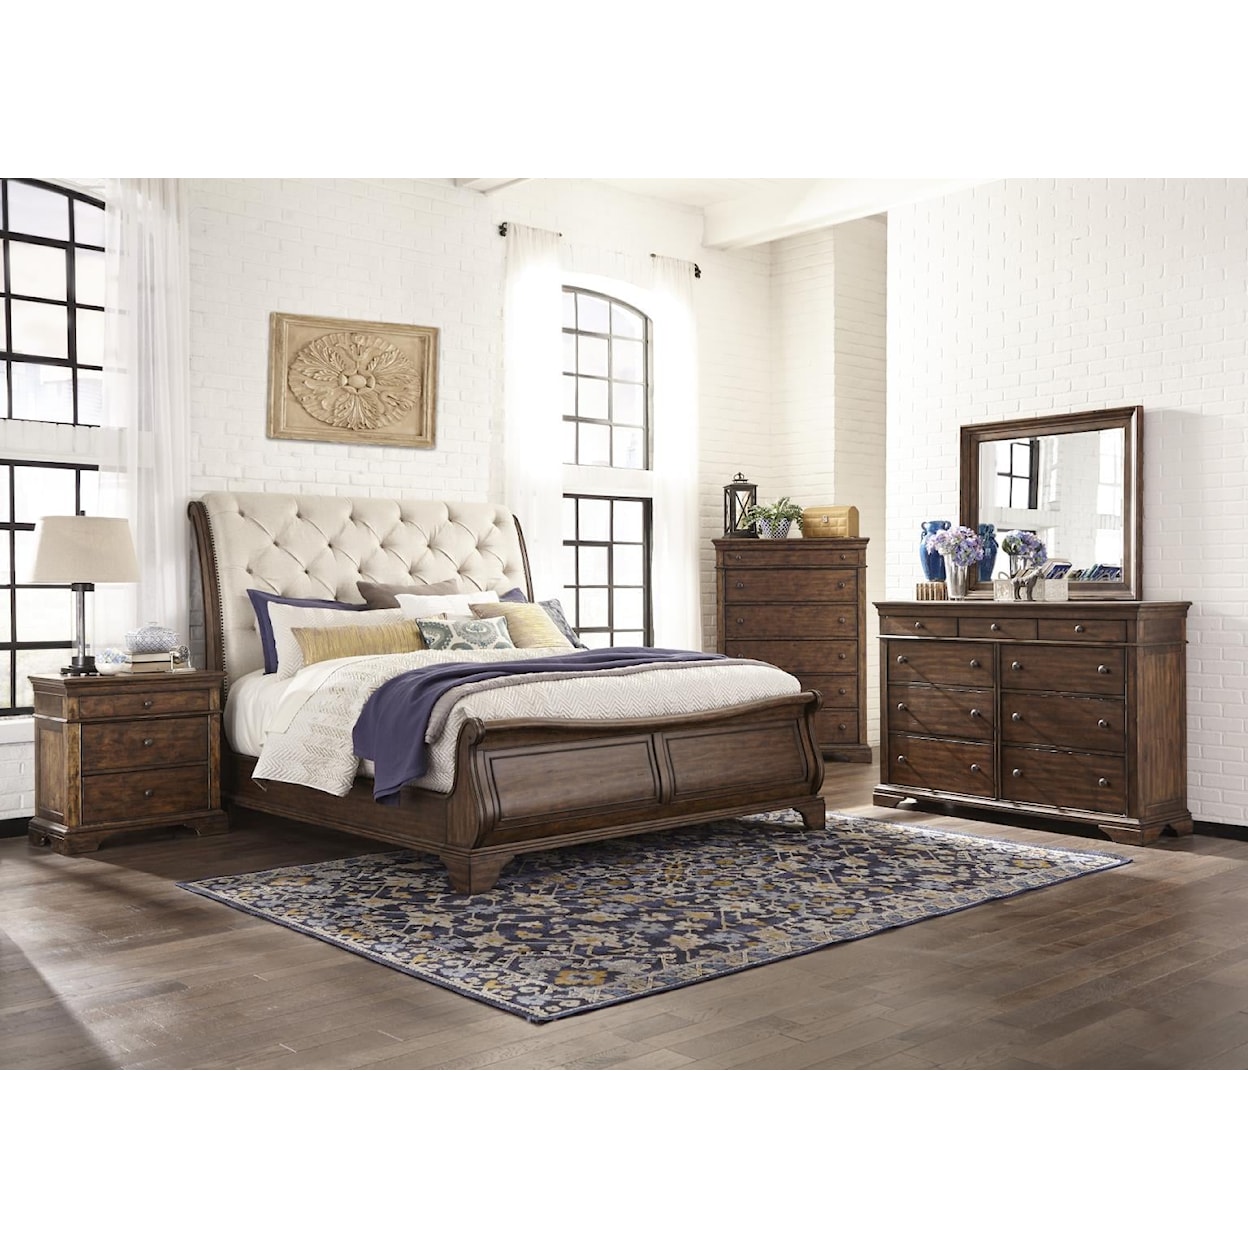 Trisha Yearwood Home Collection by Legacy Classic Trisha Yearwood Home Cal King Upholstered Sleigh Bed